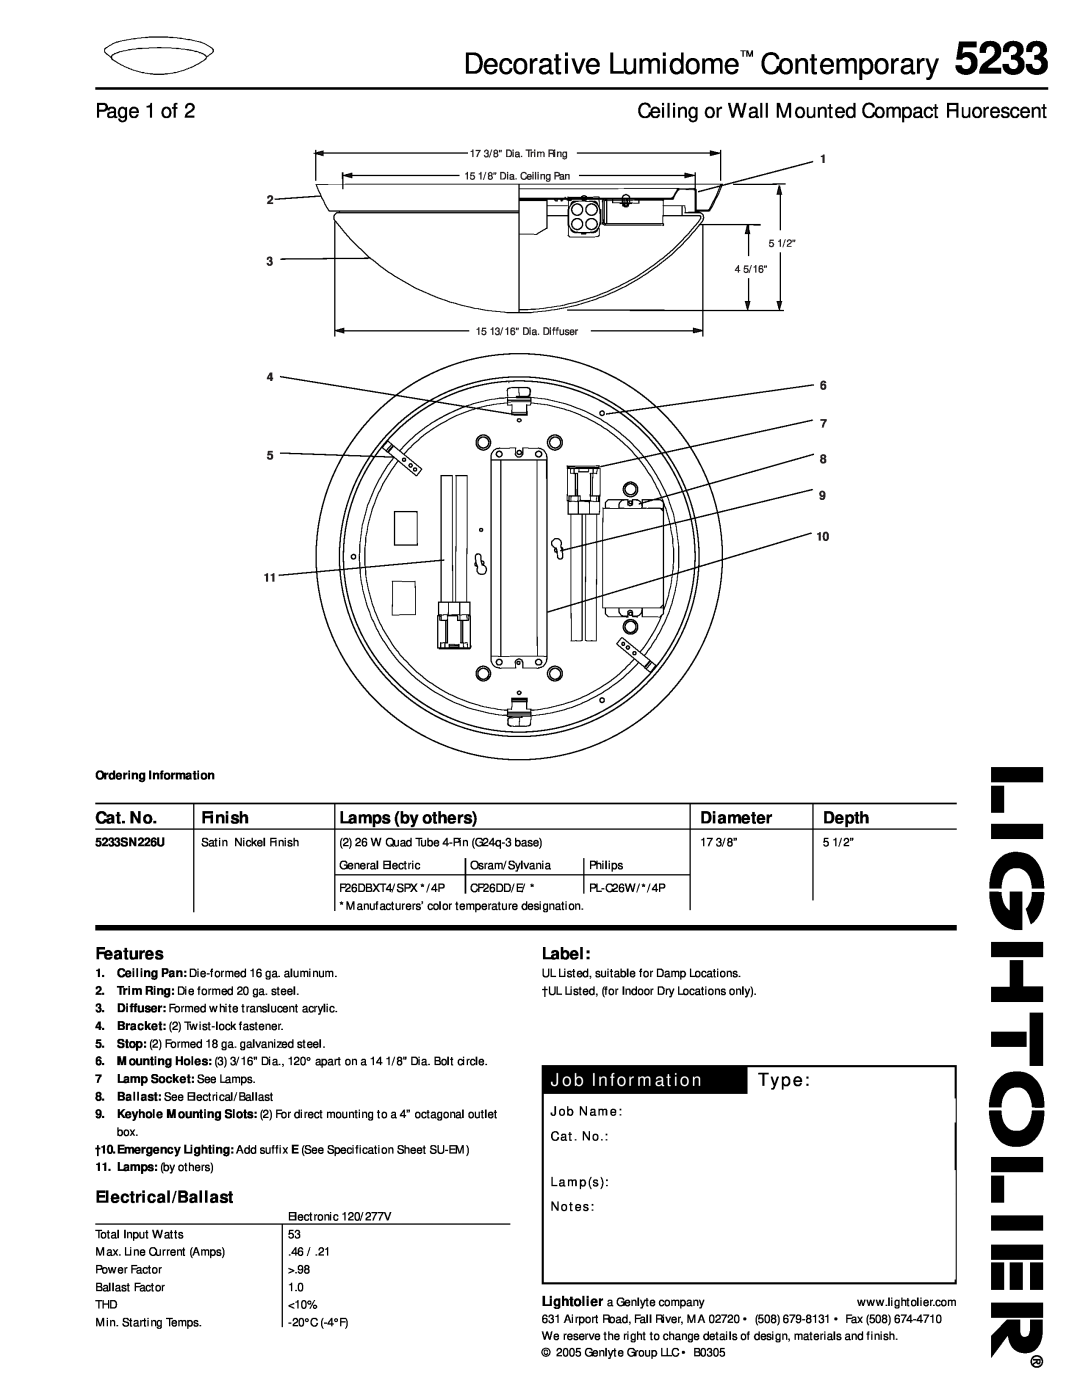 Lightolier 5233 specifications Decorative Lumidome Contemporary, Page 1 of, Ceiling or Wall Mounted Compact Fluorescent 